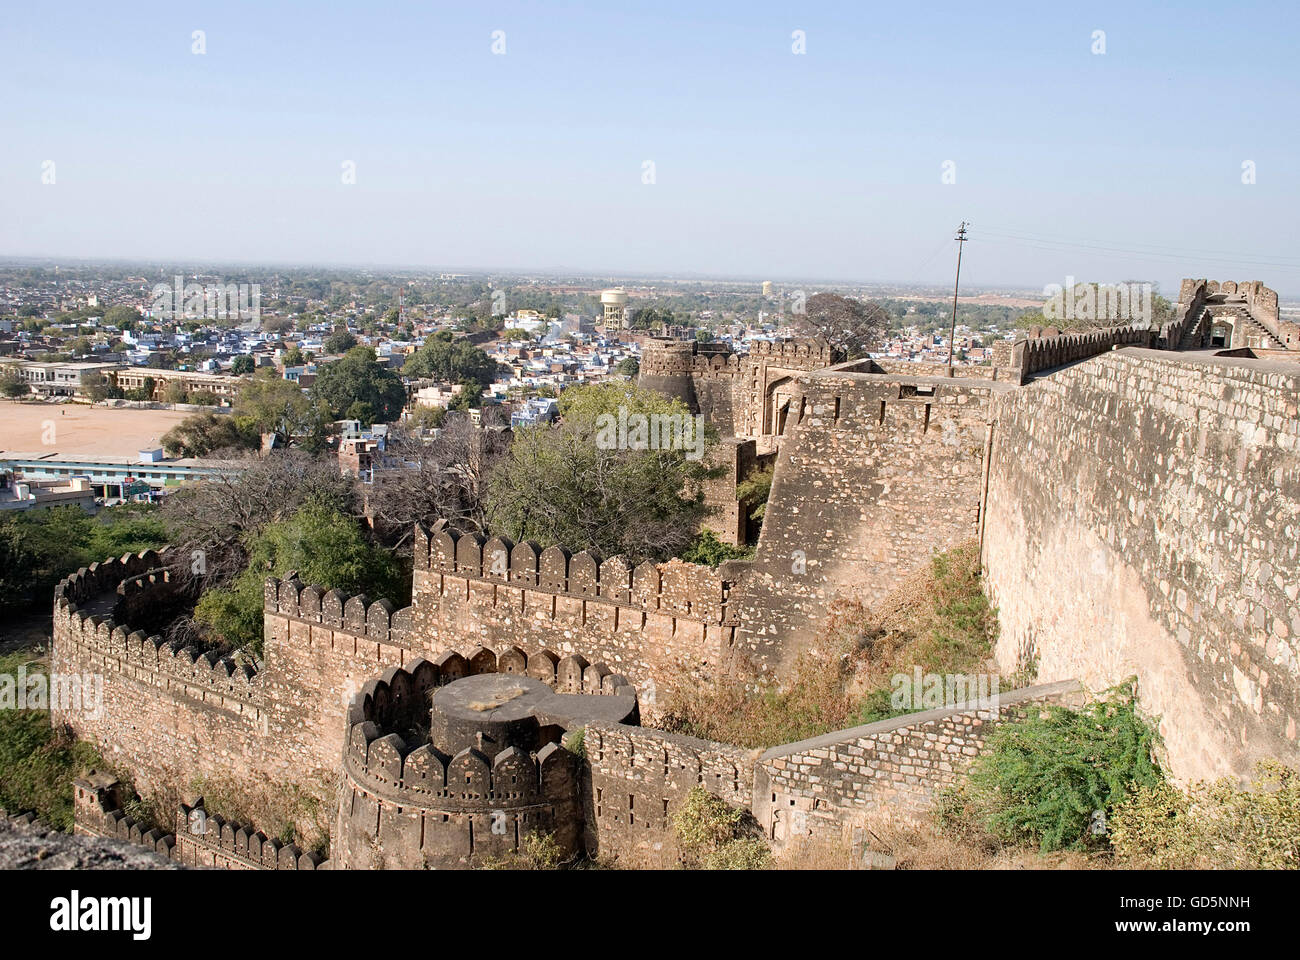 100+ Jhansi Fort Stock Photos, Pictures & Royalty-Free Images - iStock